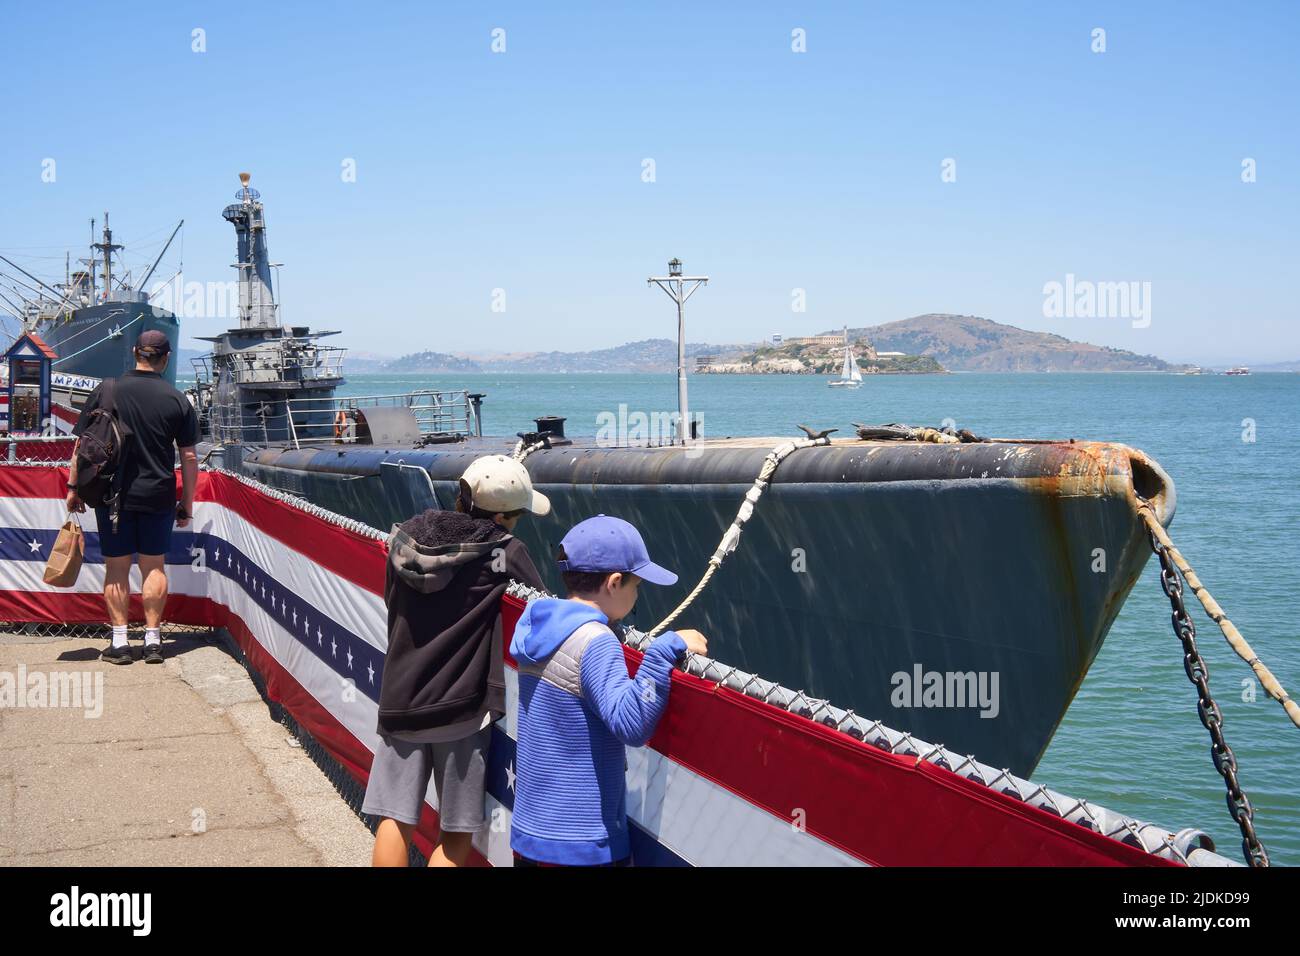 Two young boys admire the USS Pampanito retired submarine at San Francisco, California, with Alcatraz Island seen behind. Stock Photo